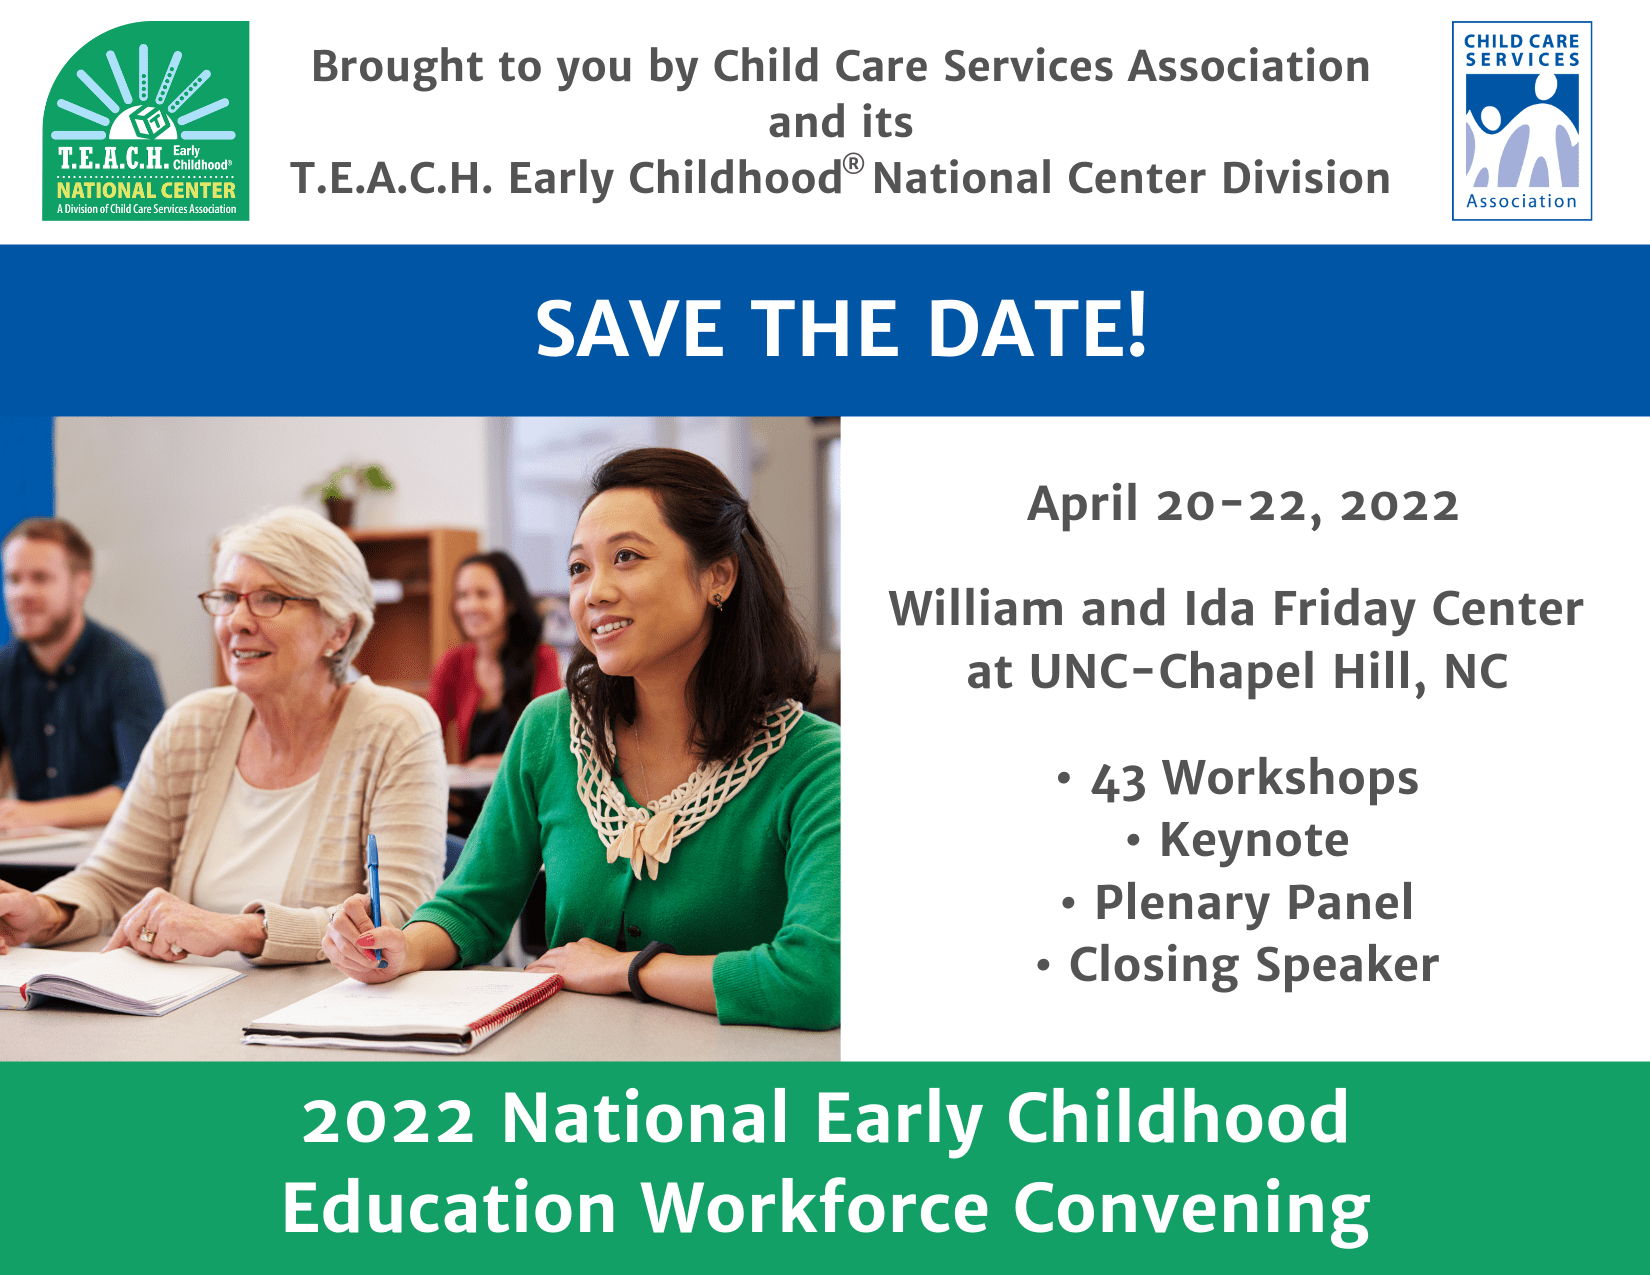 Save the Date for 2022 National Early Childhood Education Workforce Convening